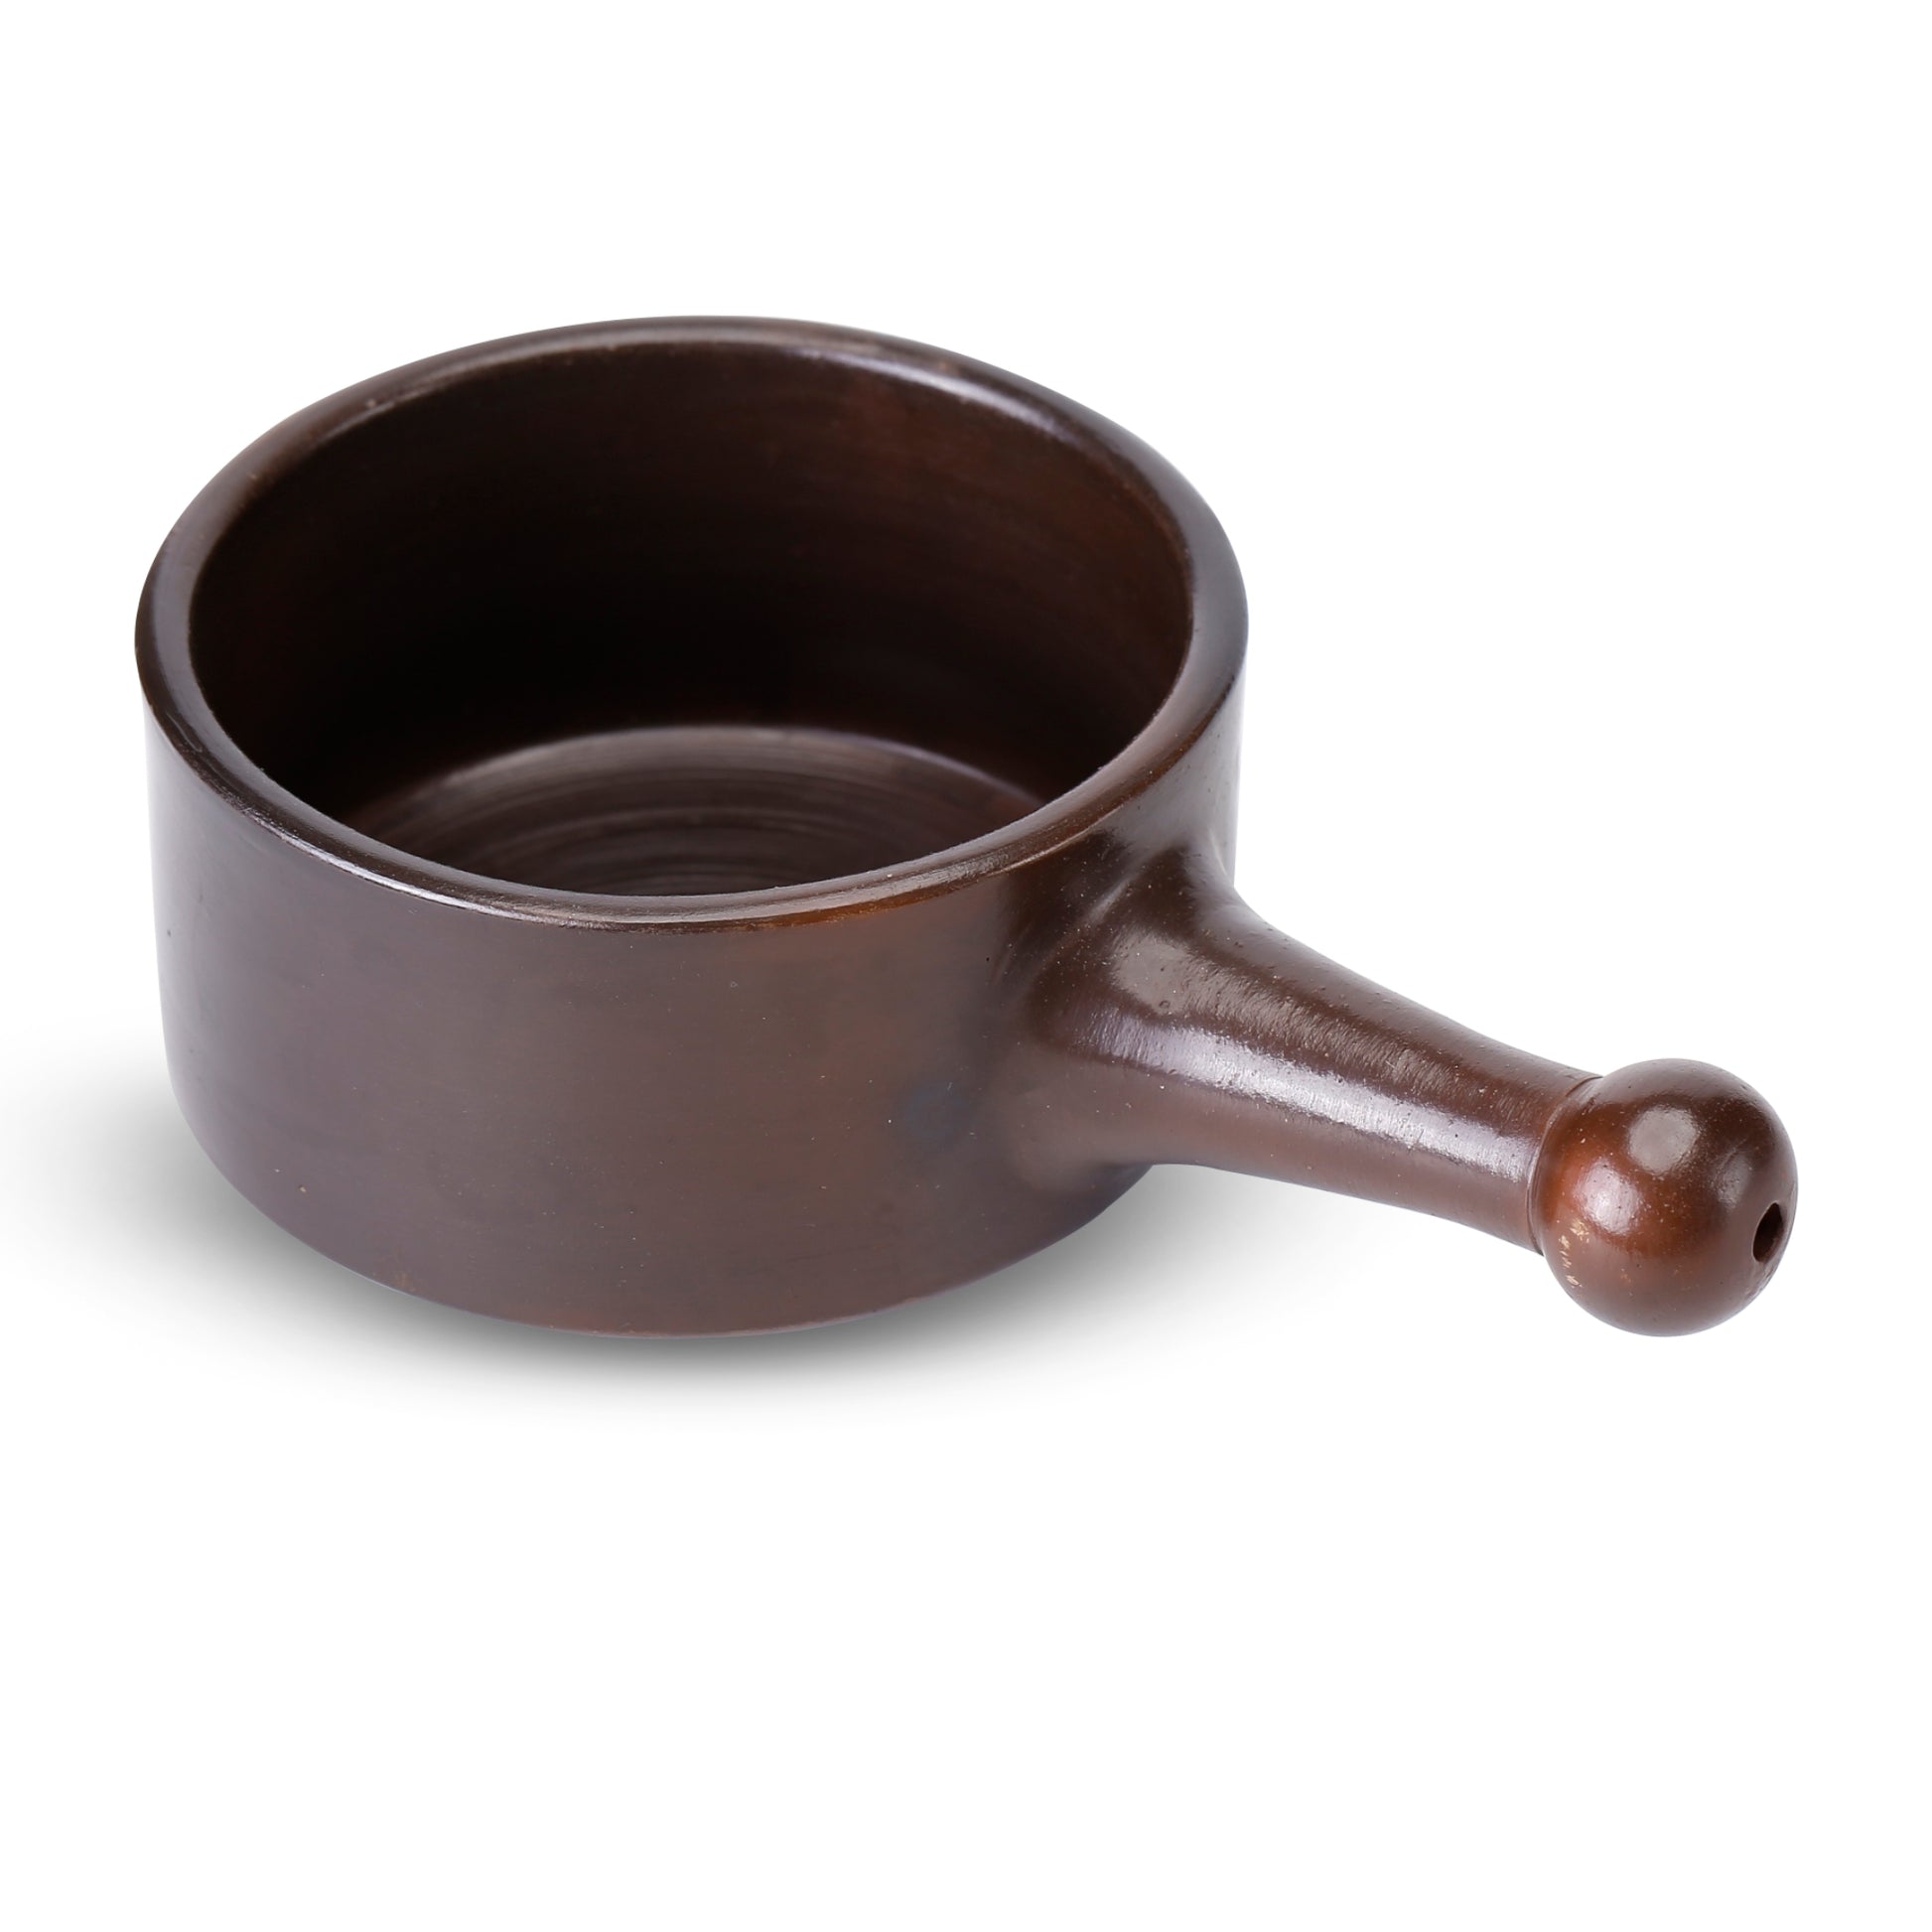 Terracotta Shaded Serving Bowl (400 ML) - 1 pc